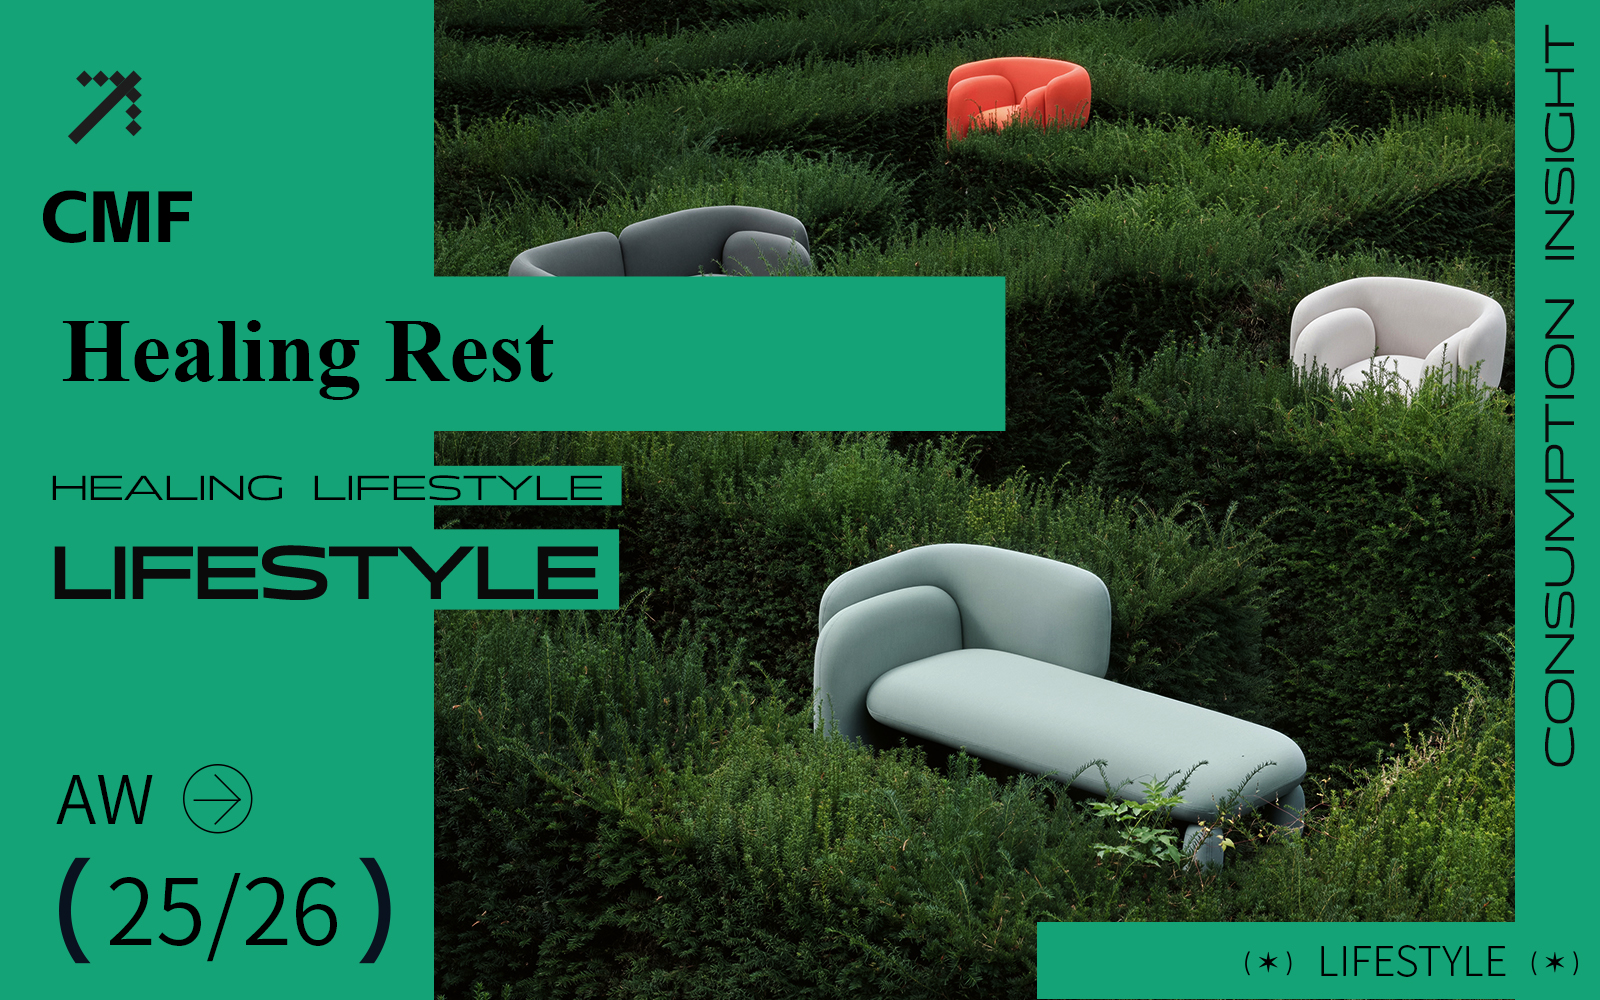 Healing Rest -- A/W 25/26 Lifestyle Trend Prediction